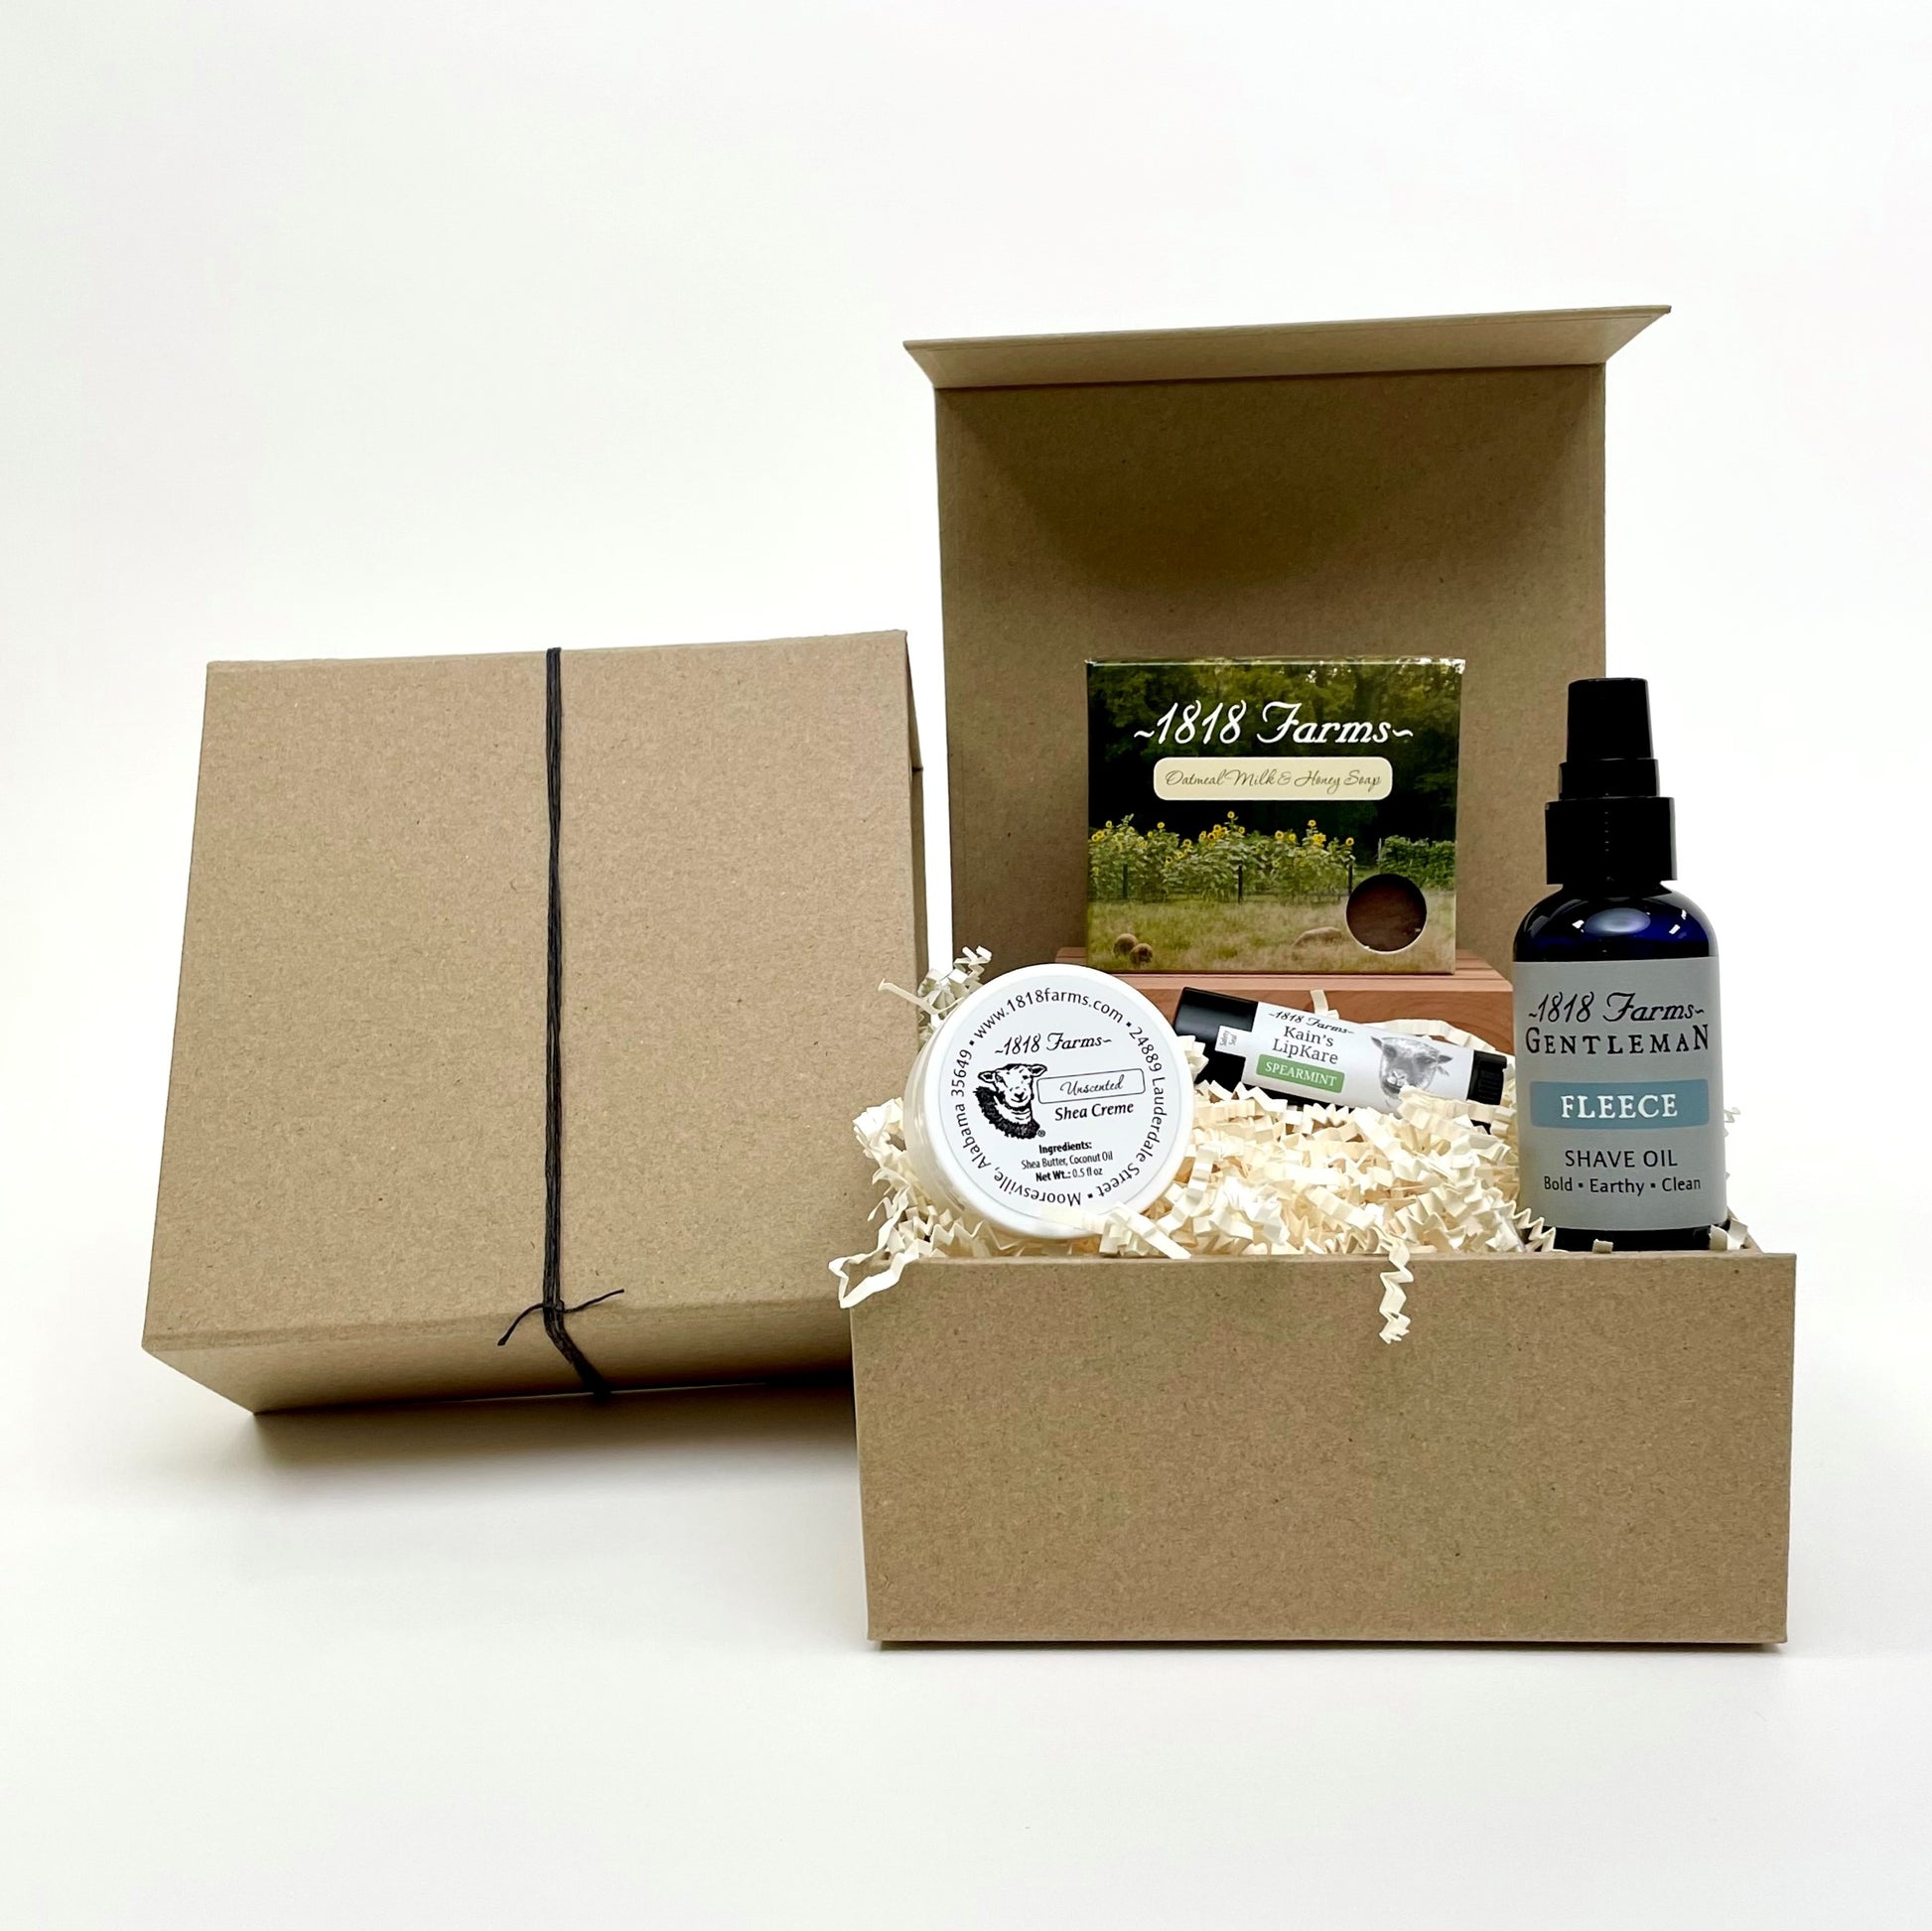 Thinking of You Gift Box (for Him) Gift Basket 1818 Farms Shave  